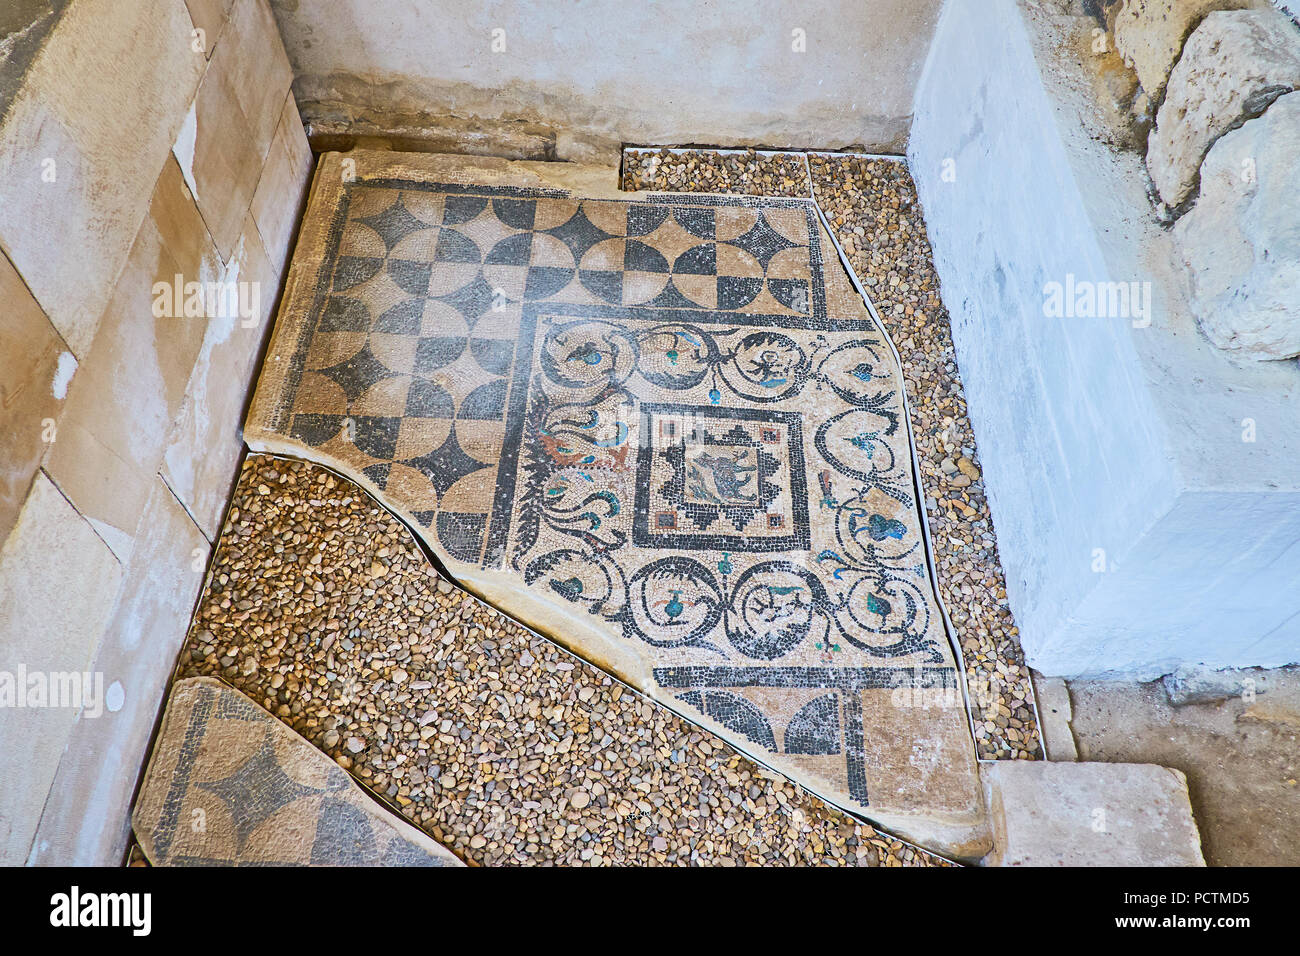 ALEXANDRIA, EGYPT - DECEMBER 18, 2017: The Roman Villa of Birds is proud of Kom Ad Dikka archaeological site, here visitors will find ancient mosaics  Stock Photo